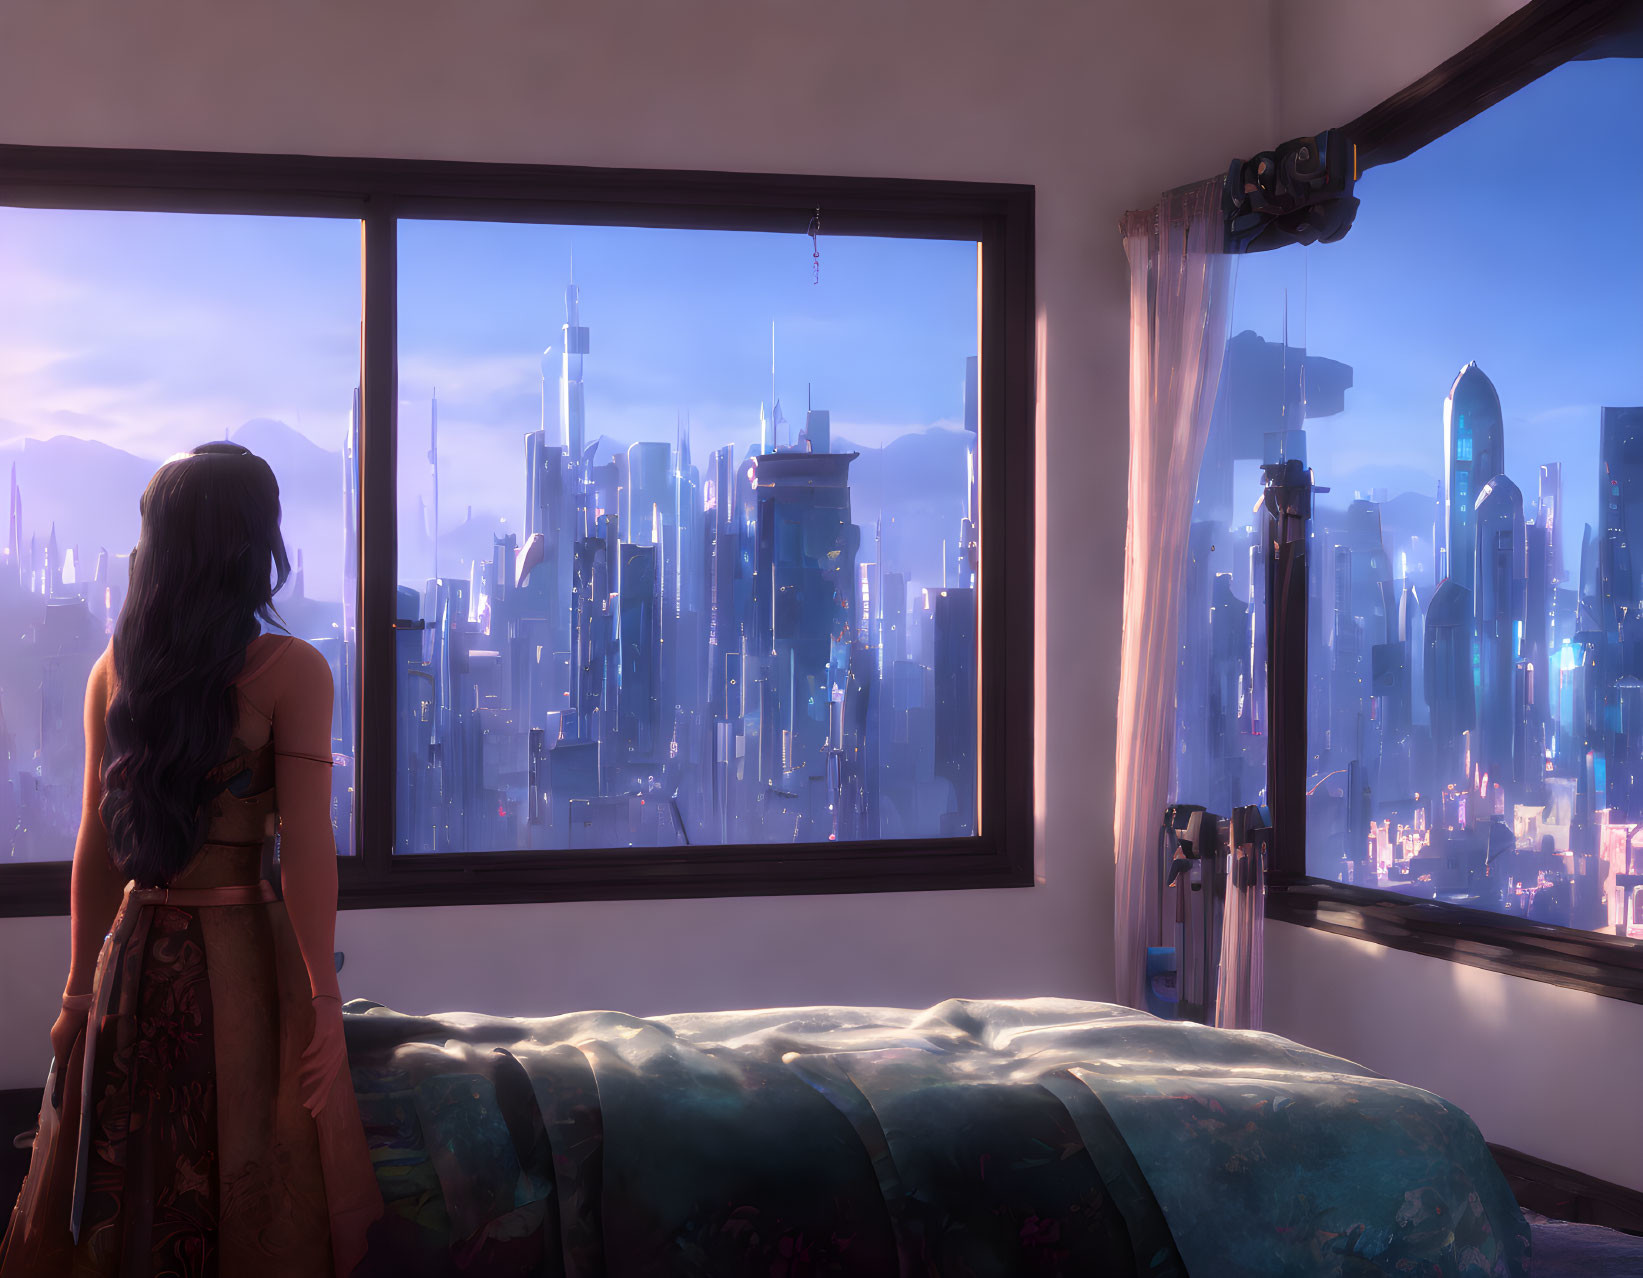 Person admires futuristic cityscape from bedroom window at dawn or dusk